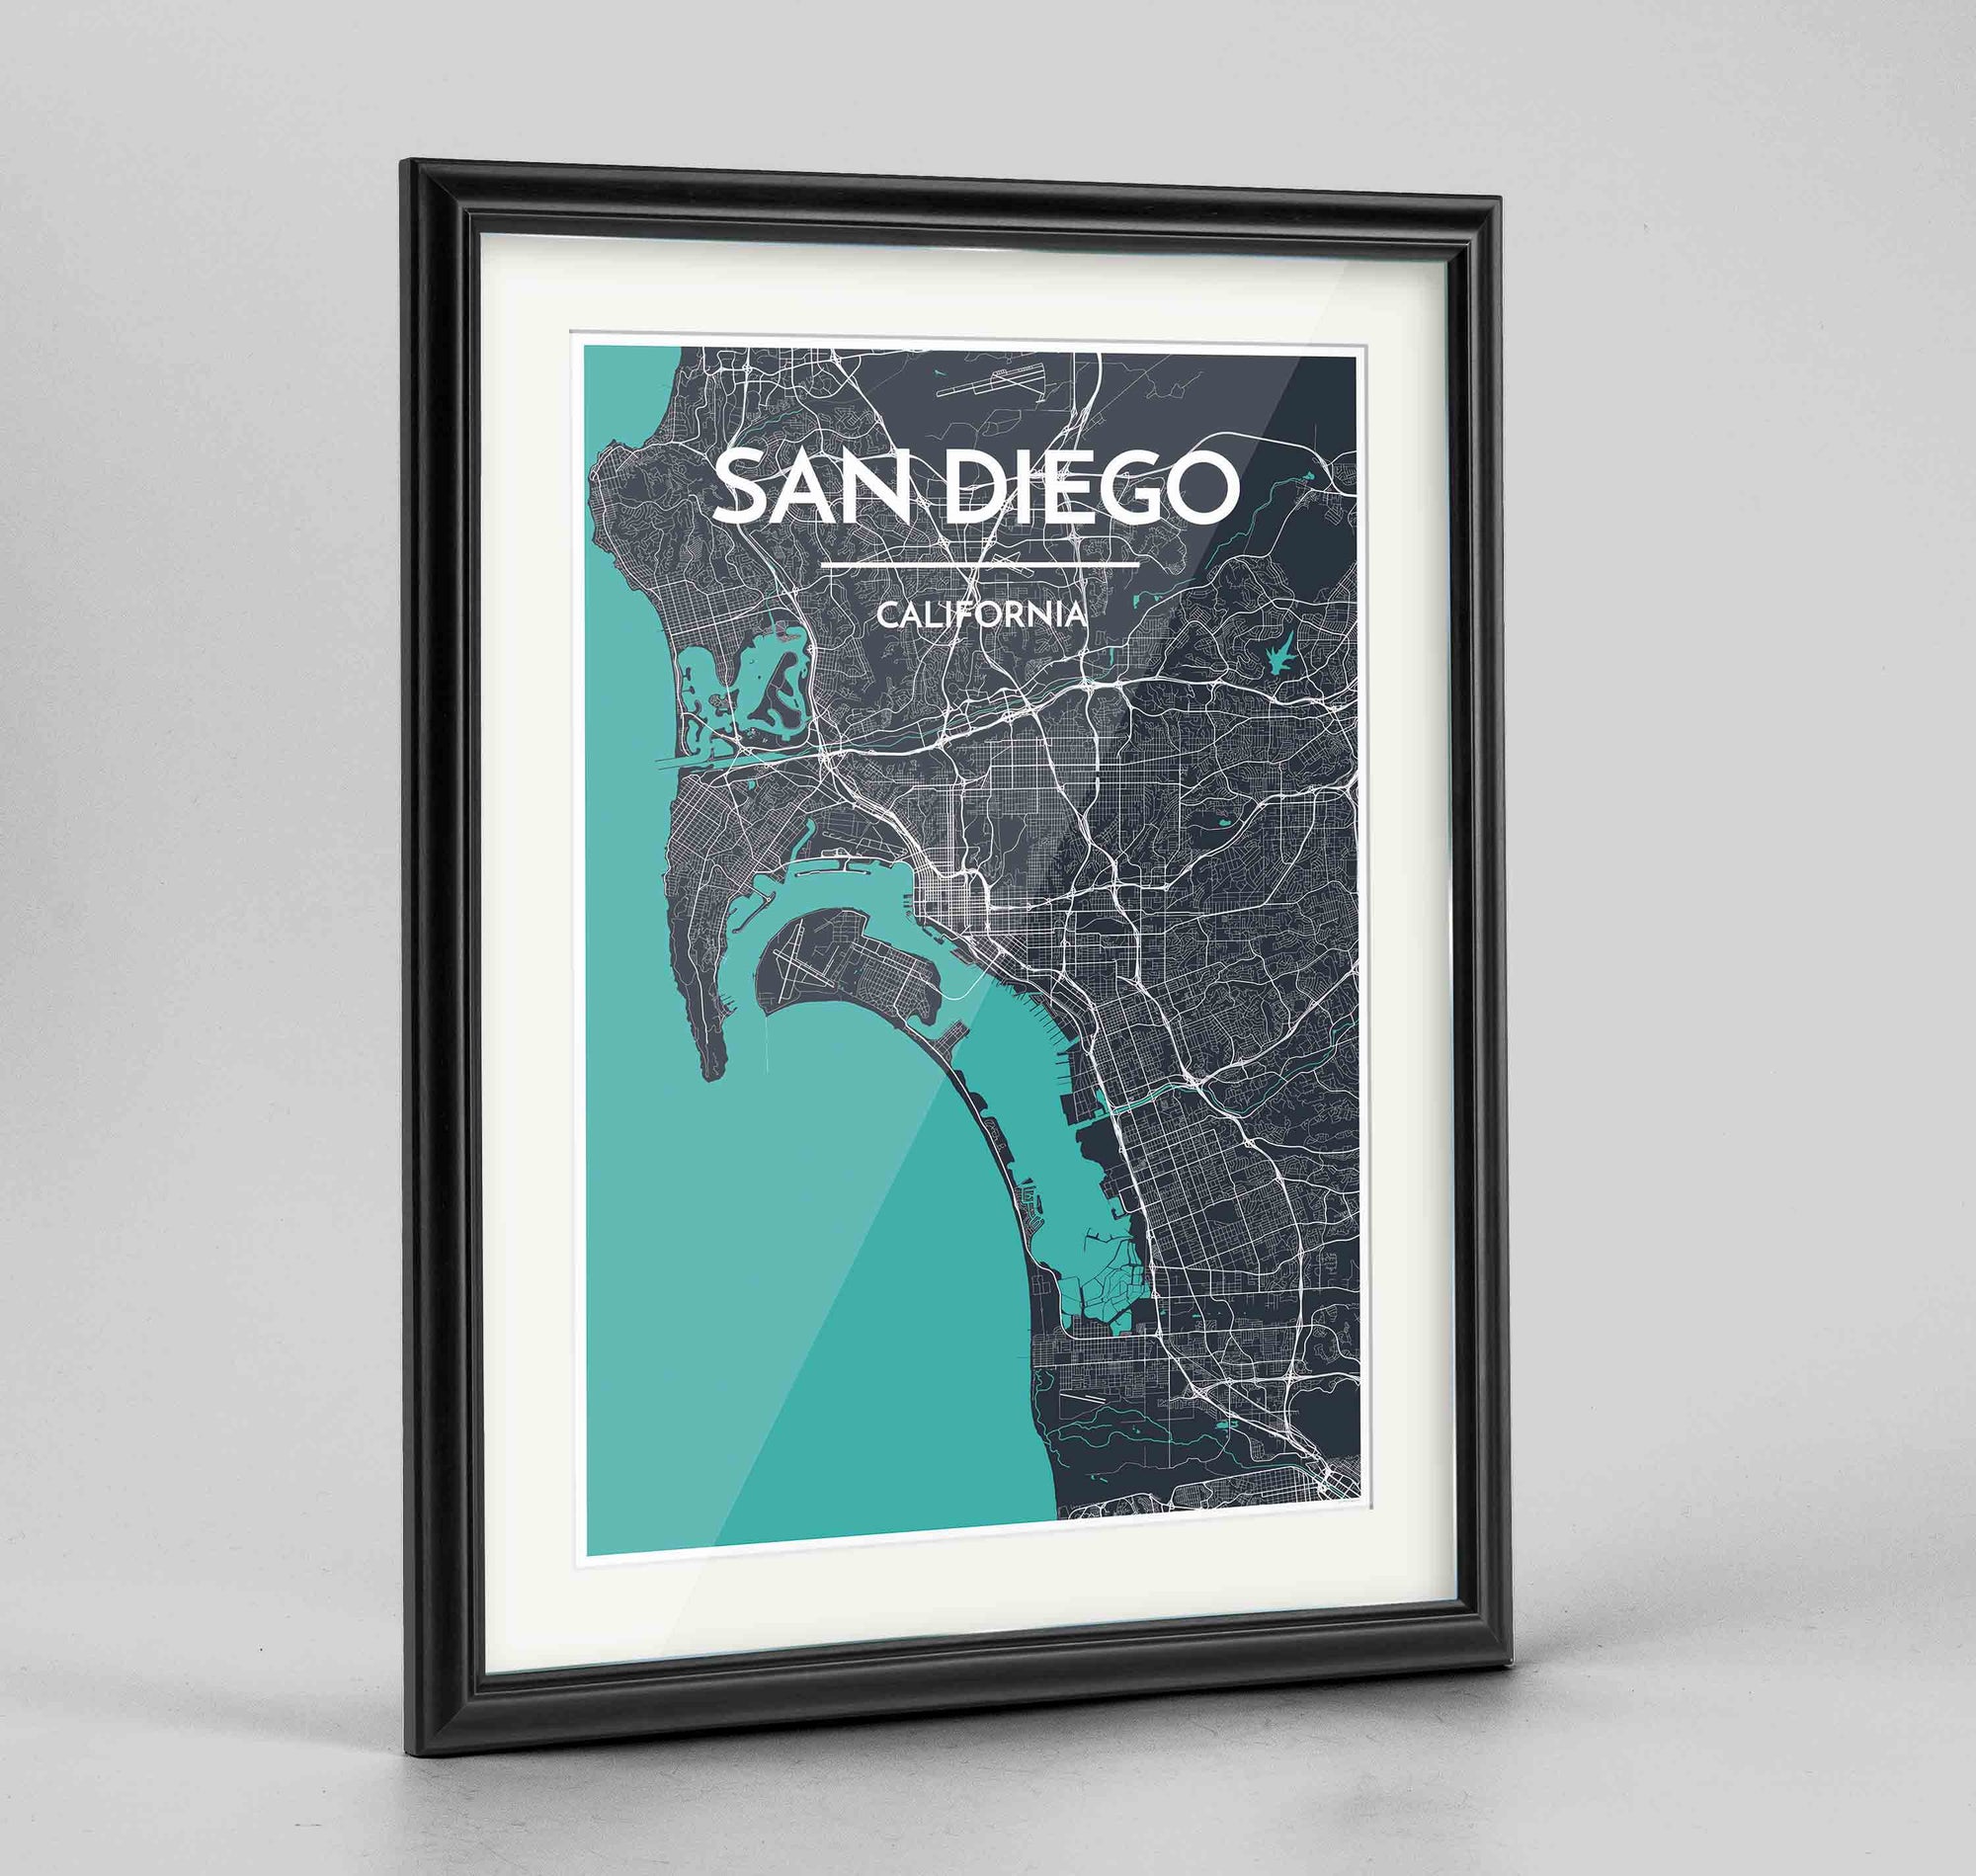 Framed San Diego Map Art Print 24x36" Traditional Black frame Point Two Design Group